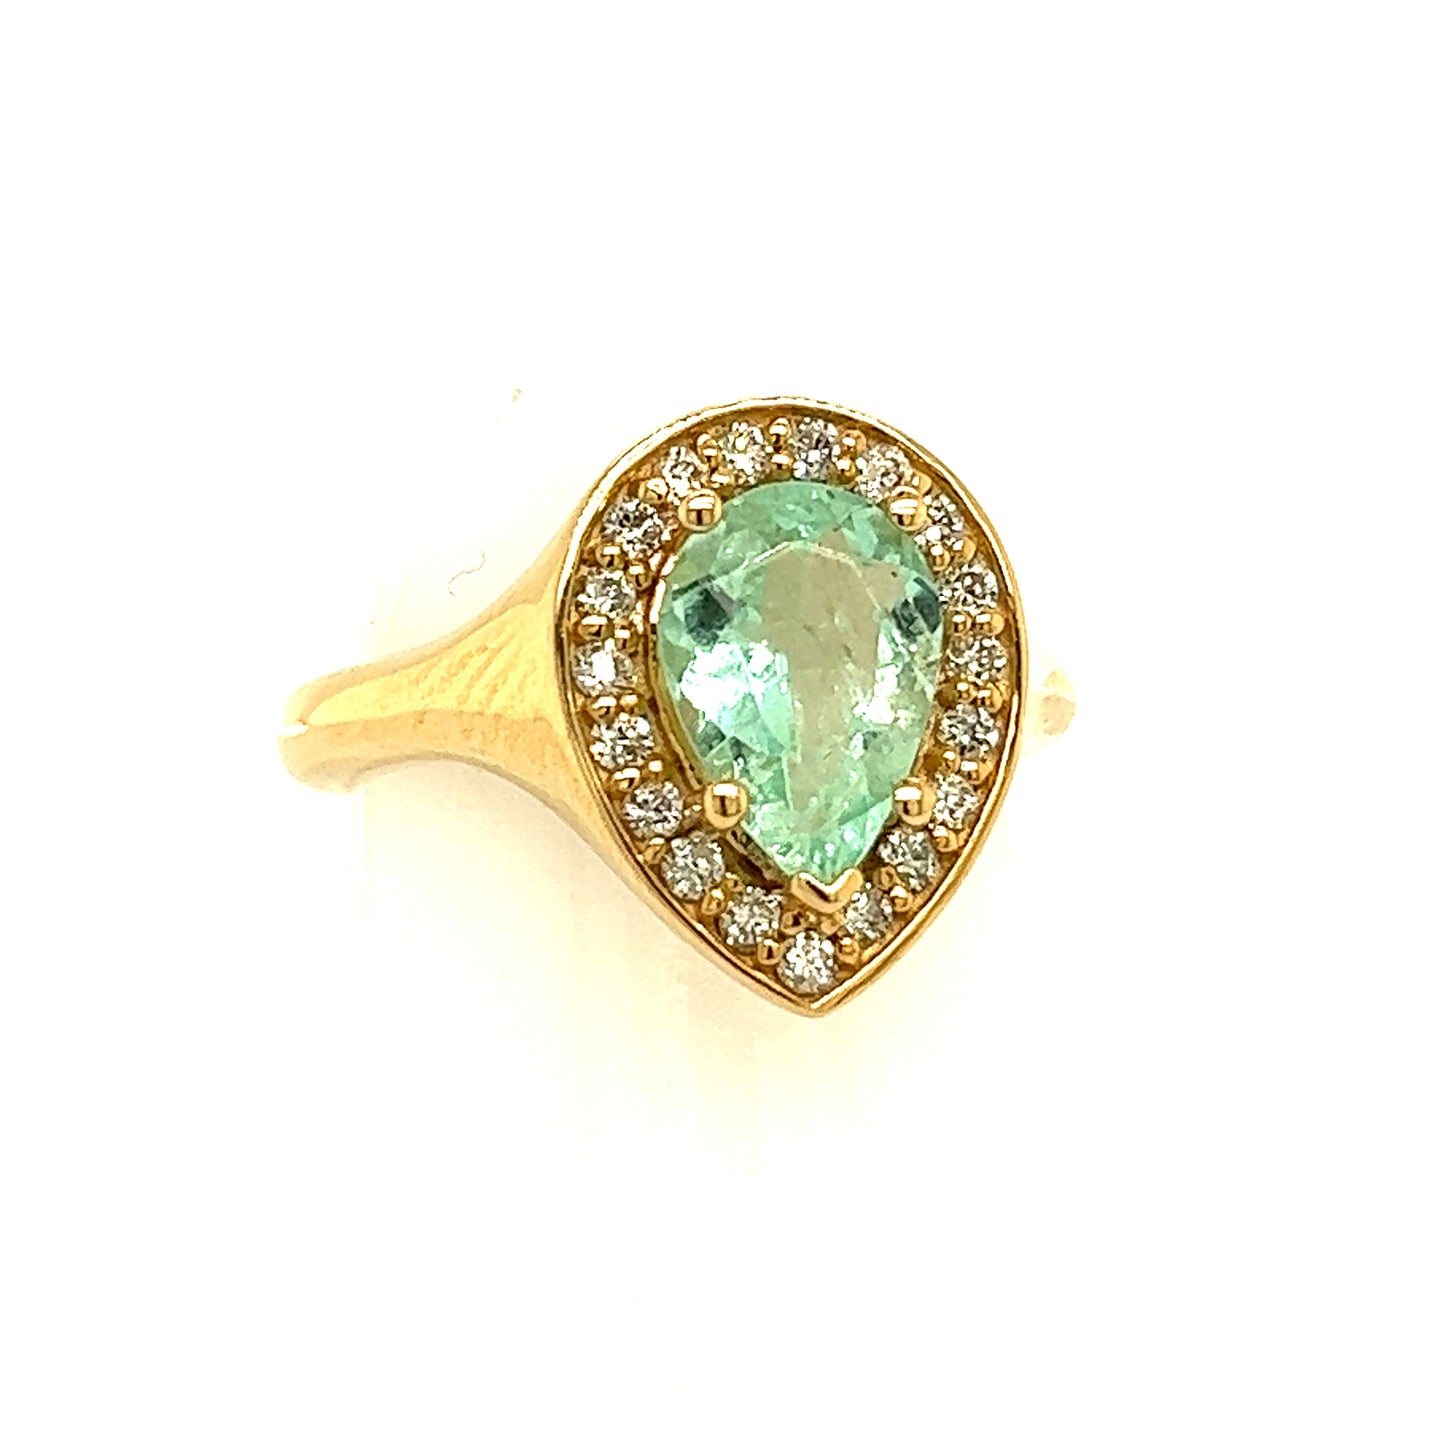 Natural Emerald Diamond Ring Size 6.5 14k Y Gold 1.74 TCW Certified $4,950 216677